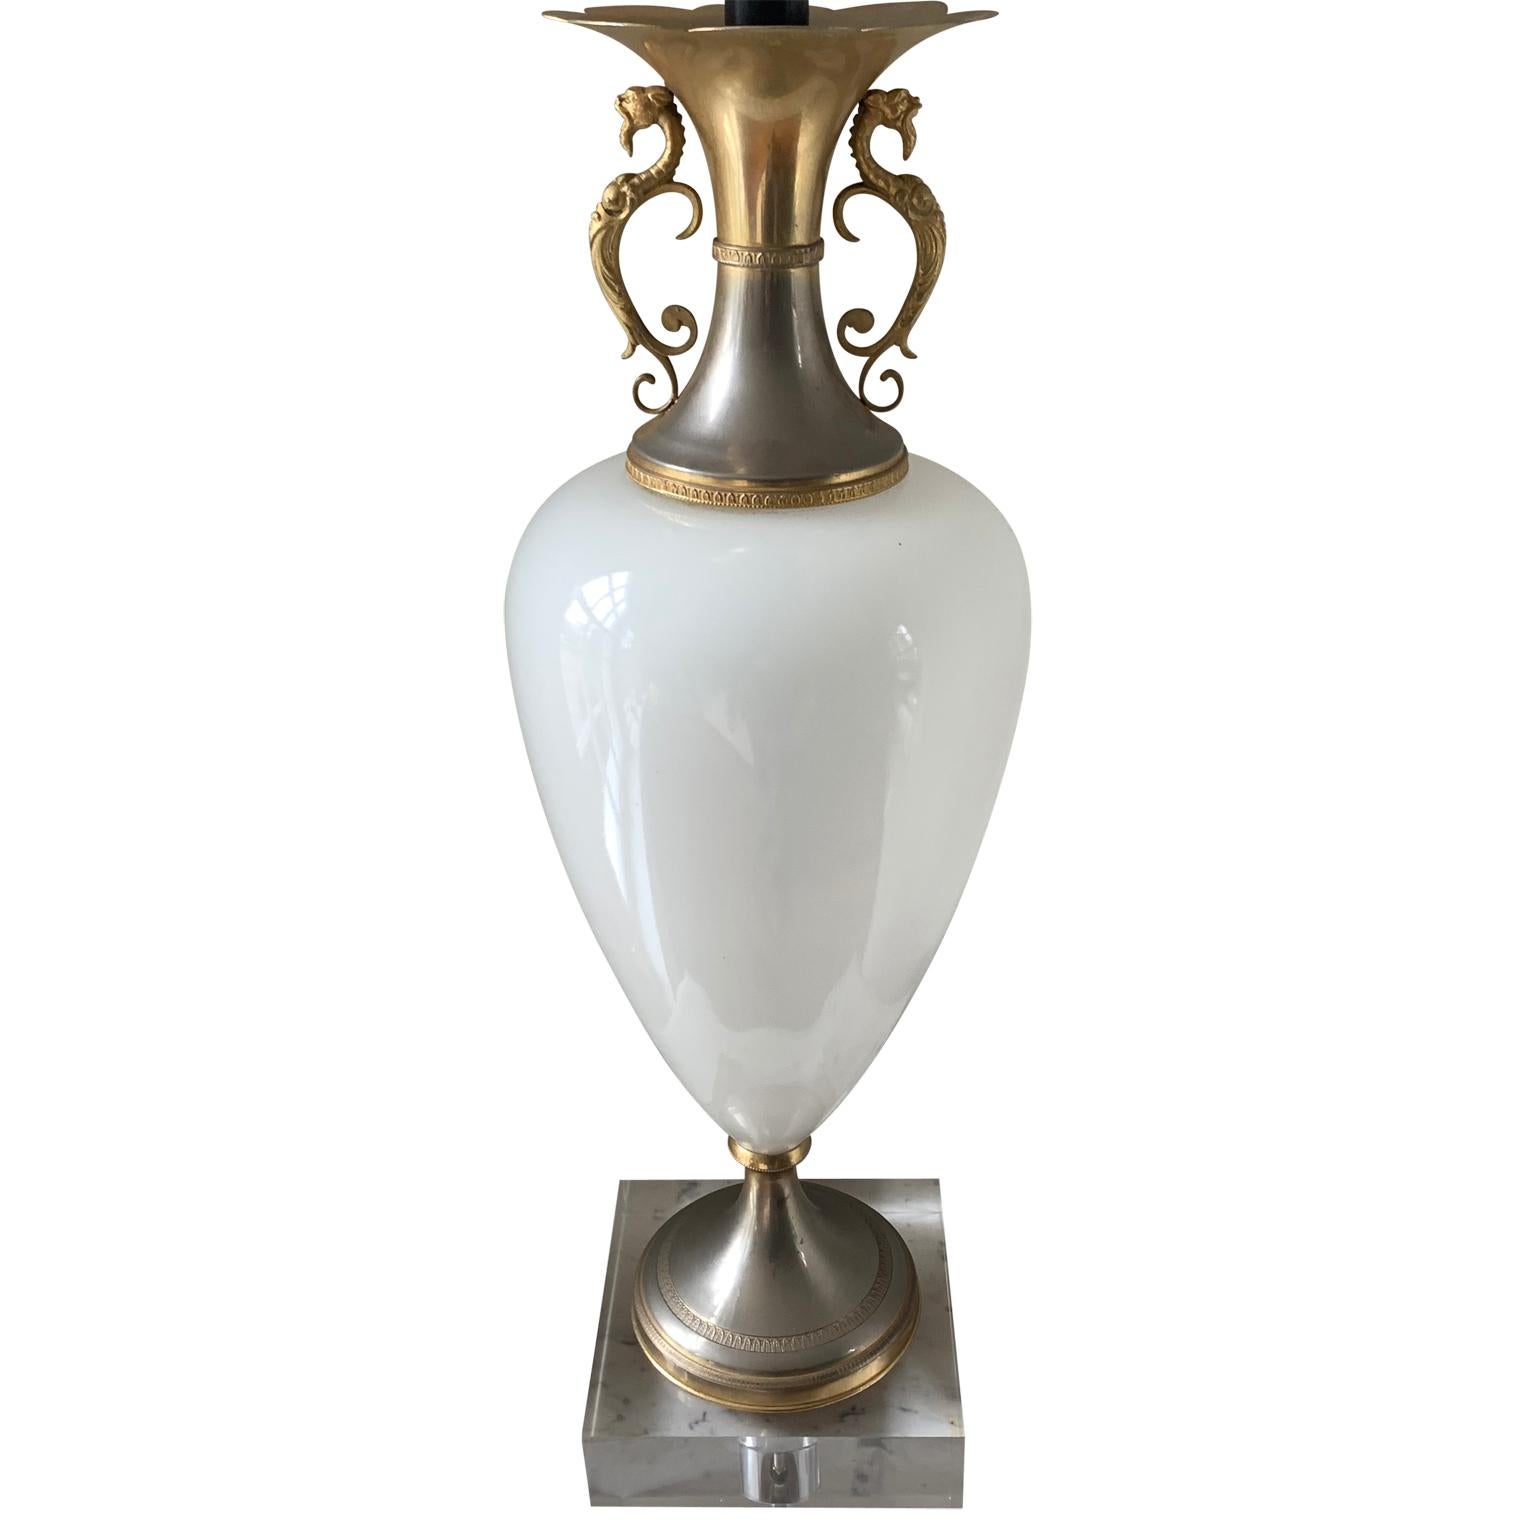 Tall white opaline table lamp on thick square Lucite base
Rock crystal finial in brass hardware. Newly re-wired.
Shade not included.

Measures: Height to top of socket is 24 inches.